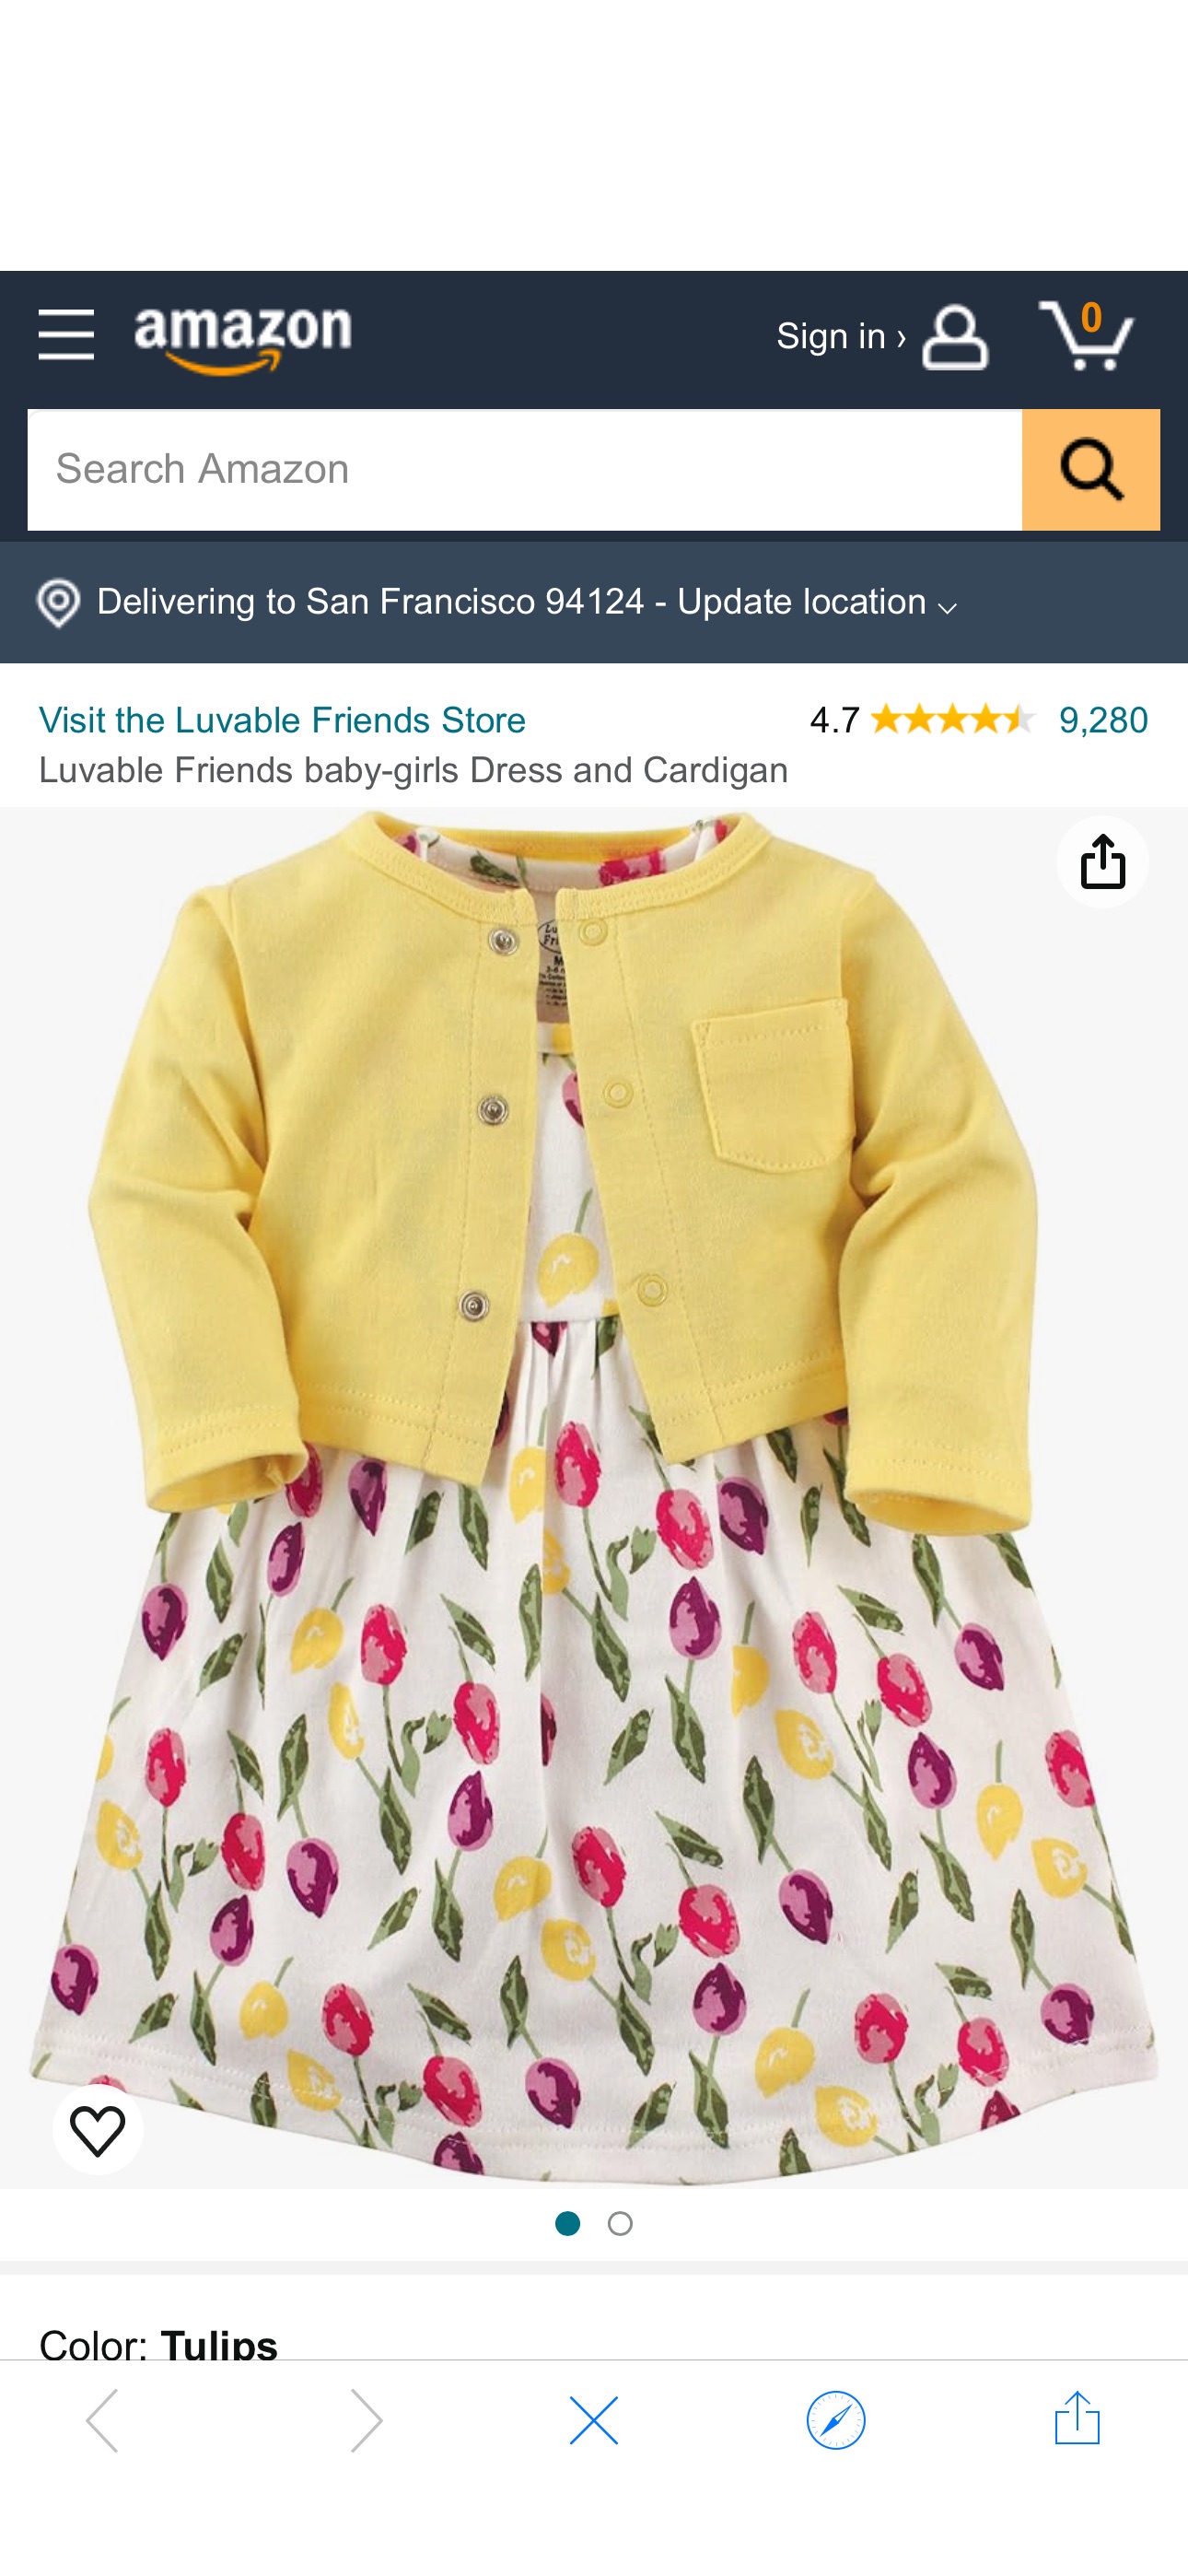 Amazon.com: Luvable Friends Baby and Toddler Girl Dress and Cardigan, Tulips, 12-18 Months : Clothing, Shoes & Jewelry女宝宝裙